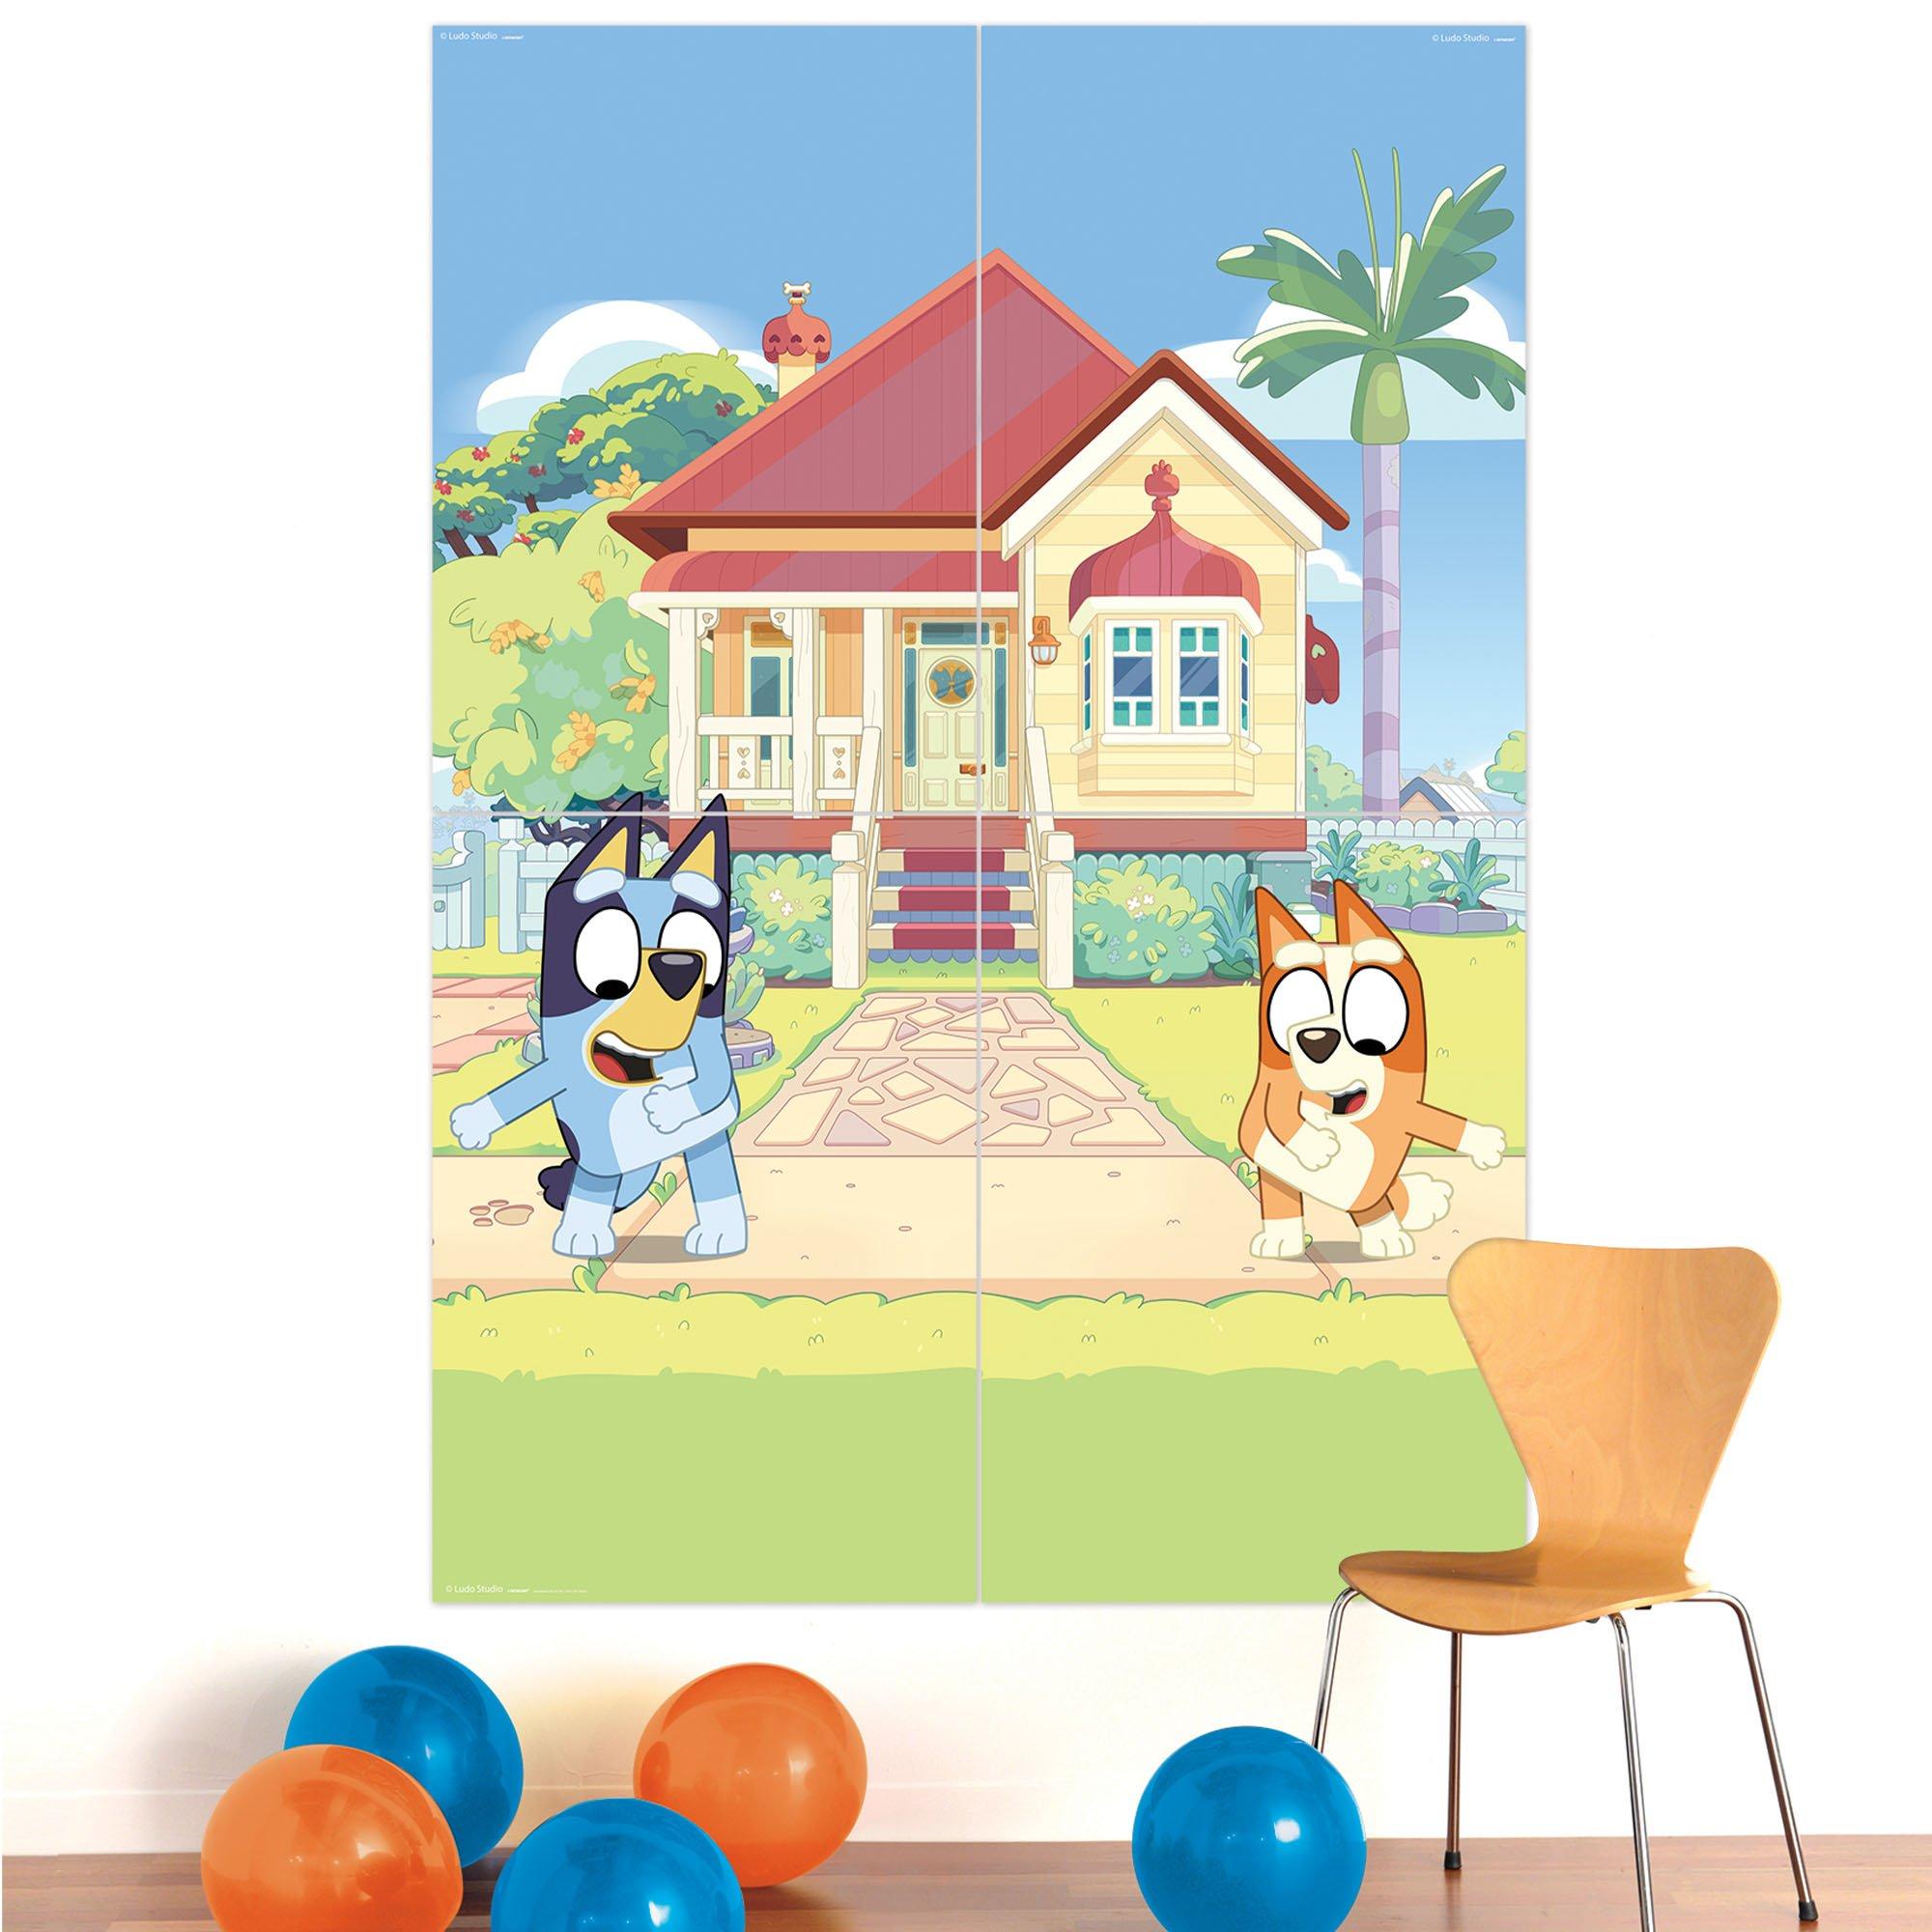 Bluey BIRTHDAY PARTY DECORATION TABLE CLOTH LOLLY LOOT BAG PLATE BANNER  Bingo